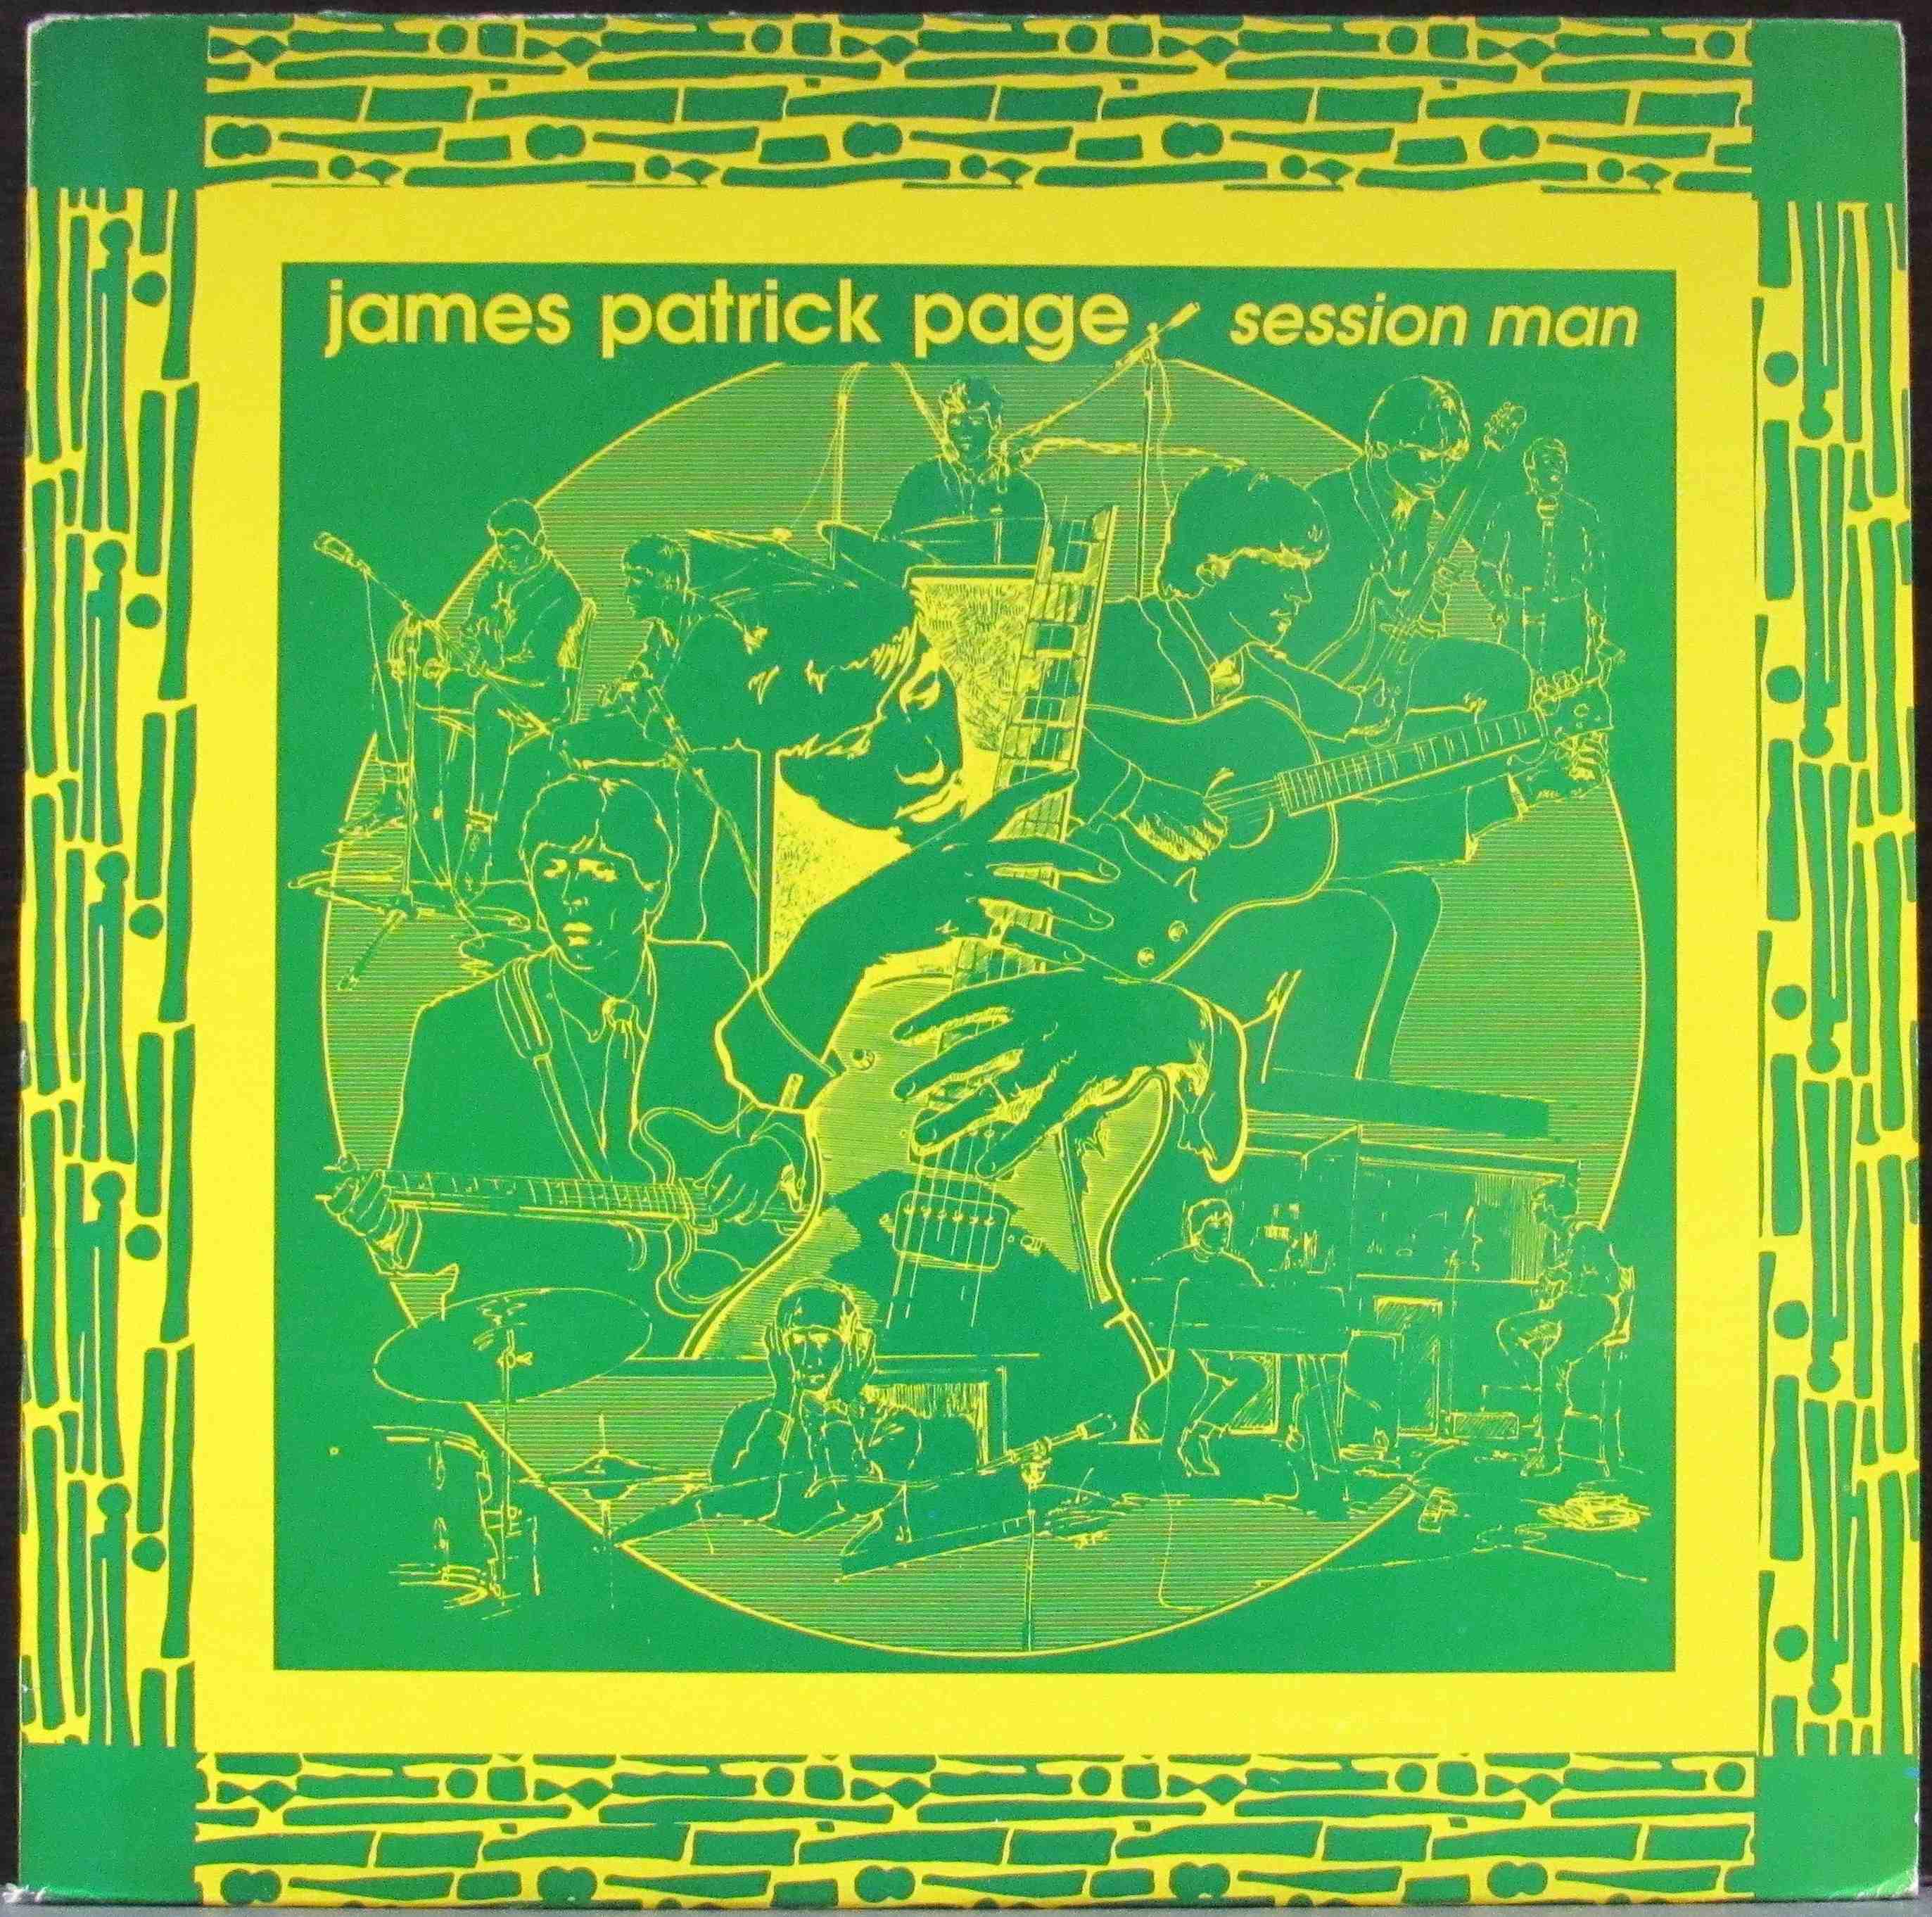 Session pages. Page session man, Vol.1 (1963-1967). Джимми пейдж 1963. James Patrick Page* – session man. Jimmy Page TV 1967.